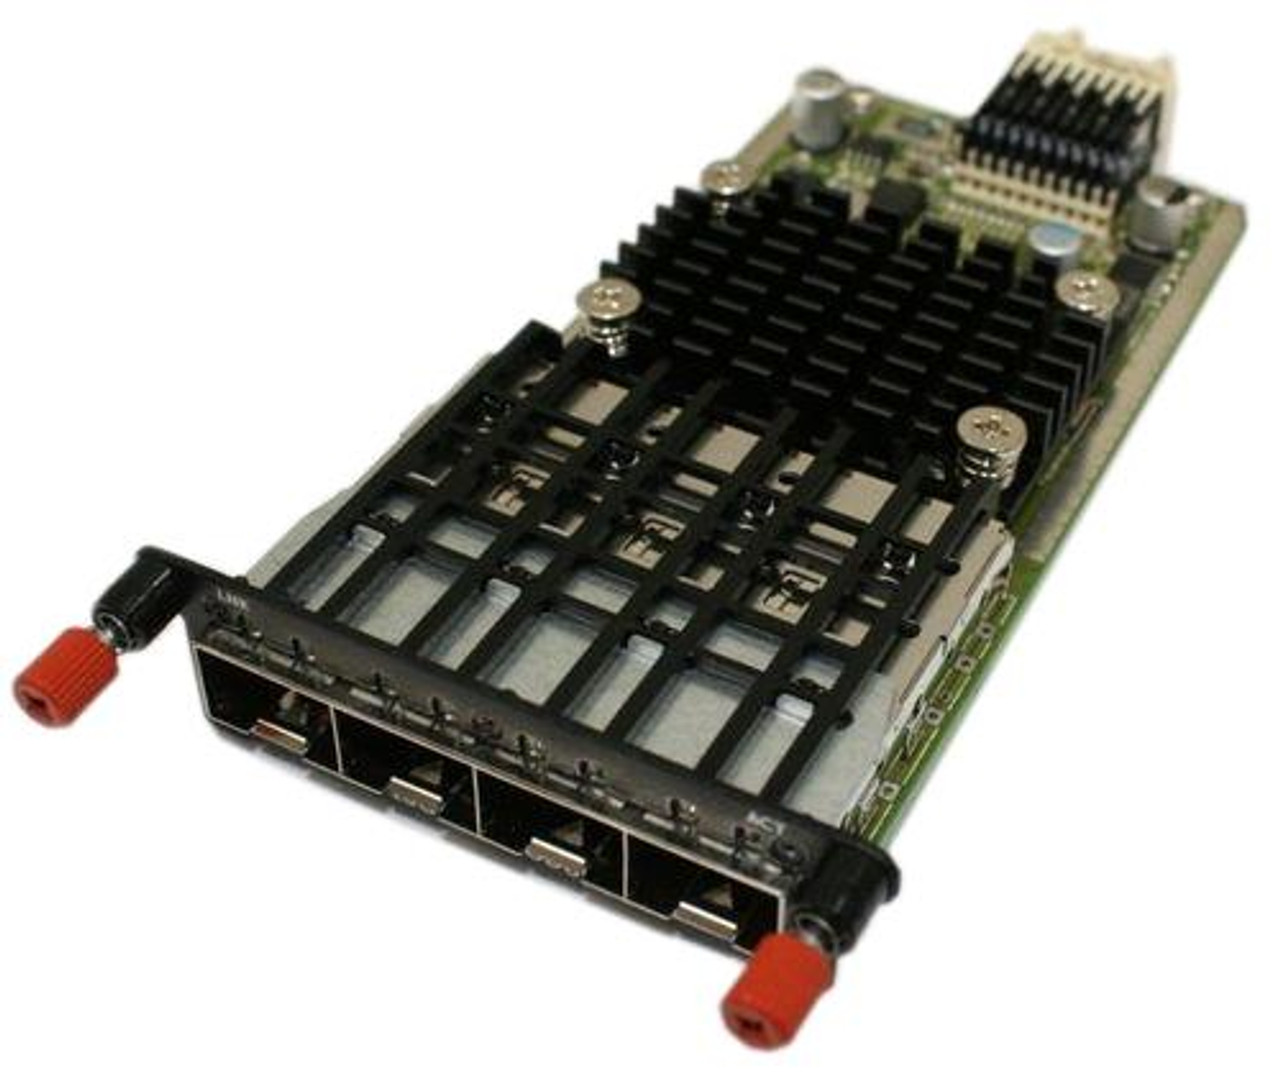 PHP6J - Dell POWERCONNECT 81XX SFP+ Module